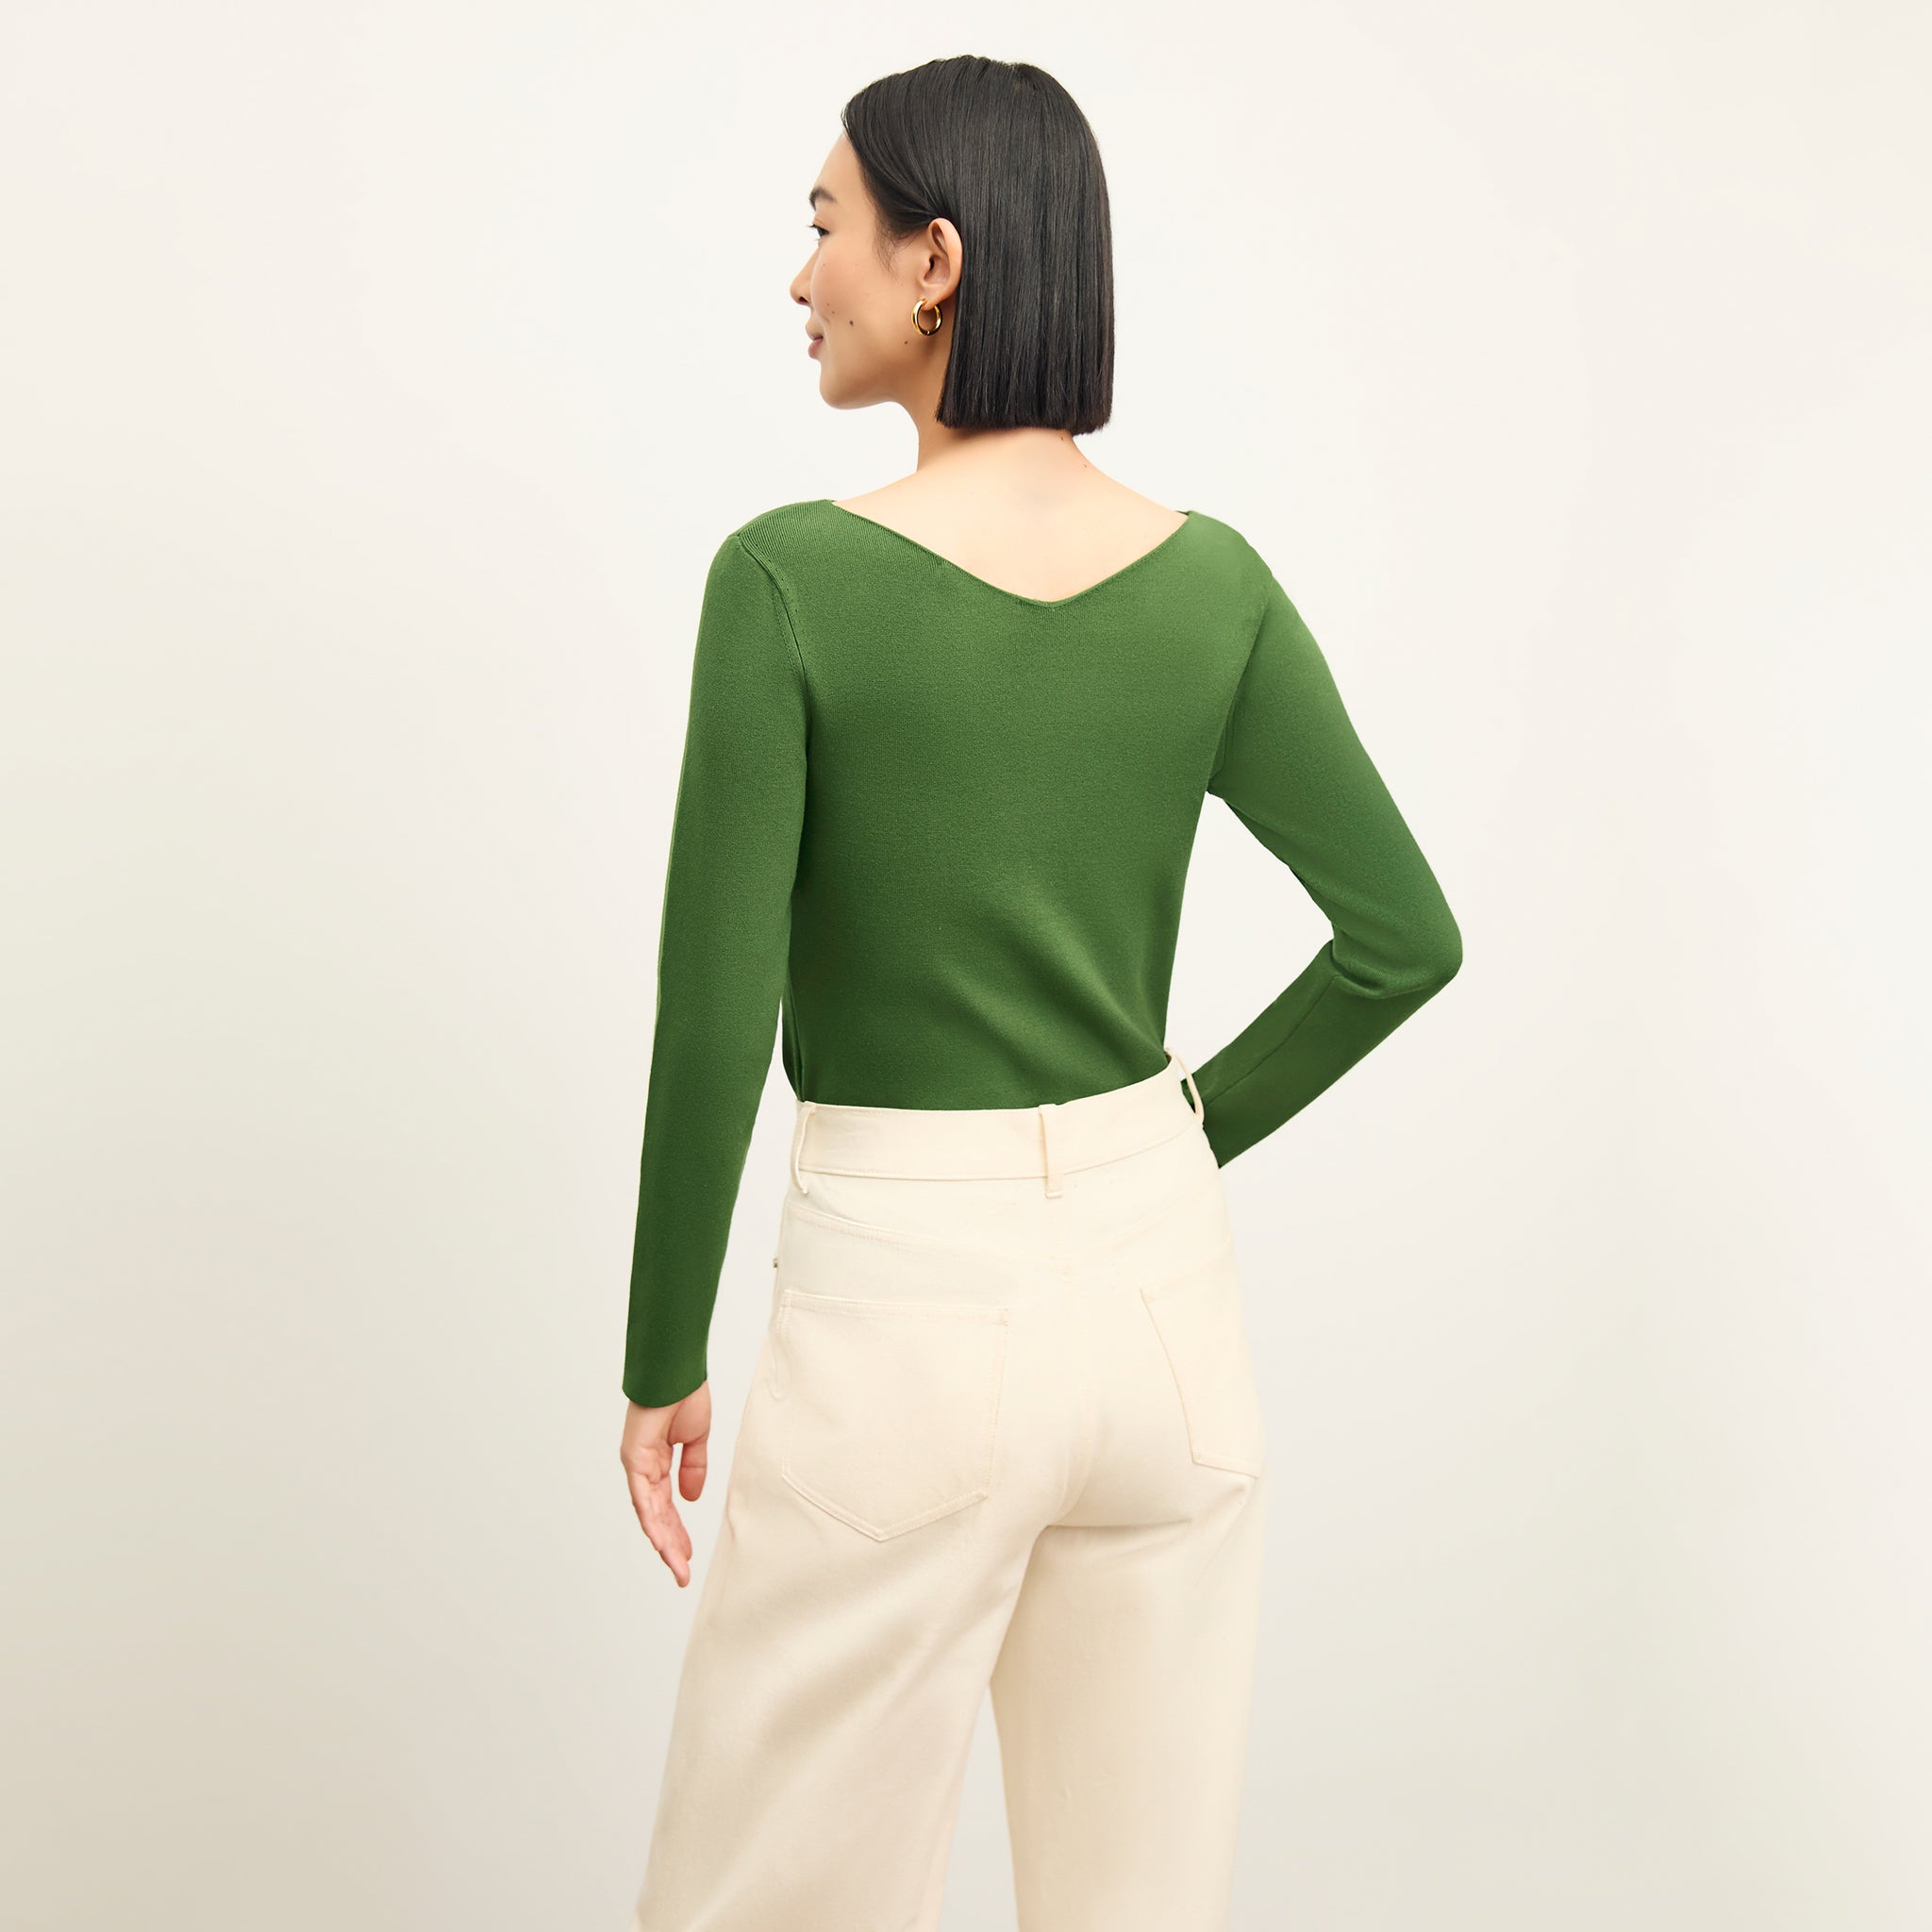 back image of a woman wearing the celeste top in basil